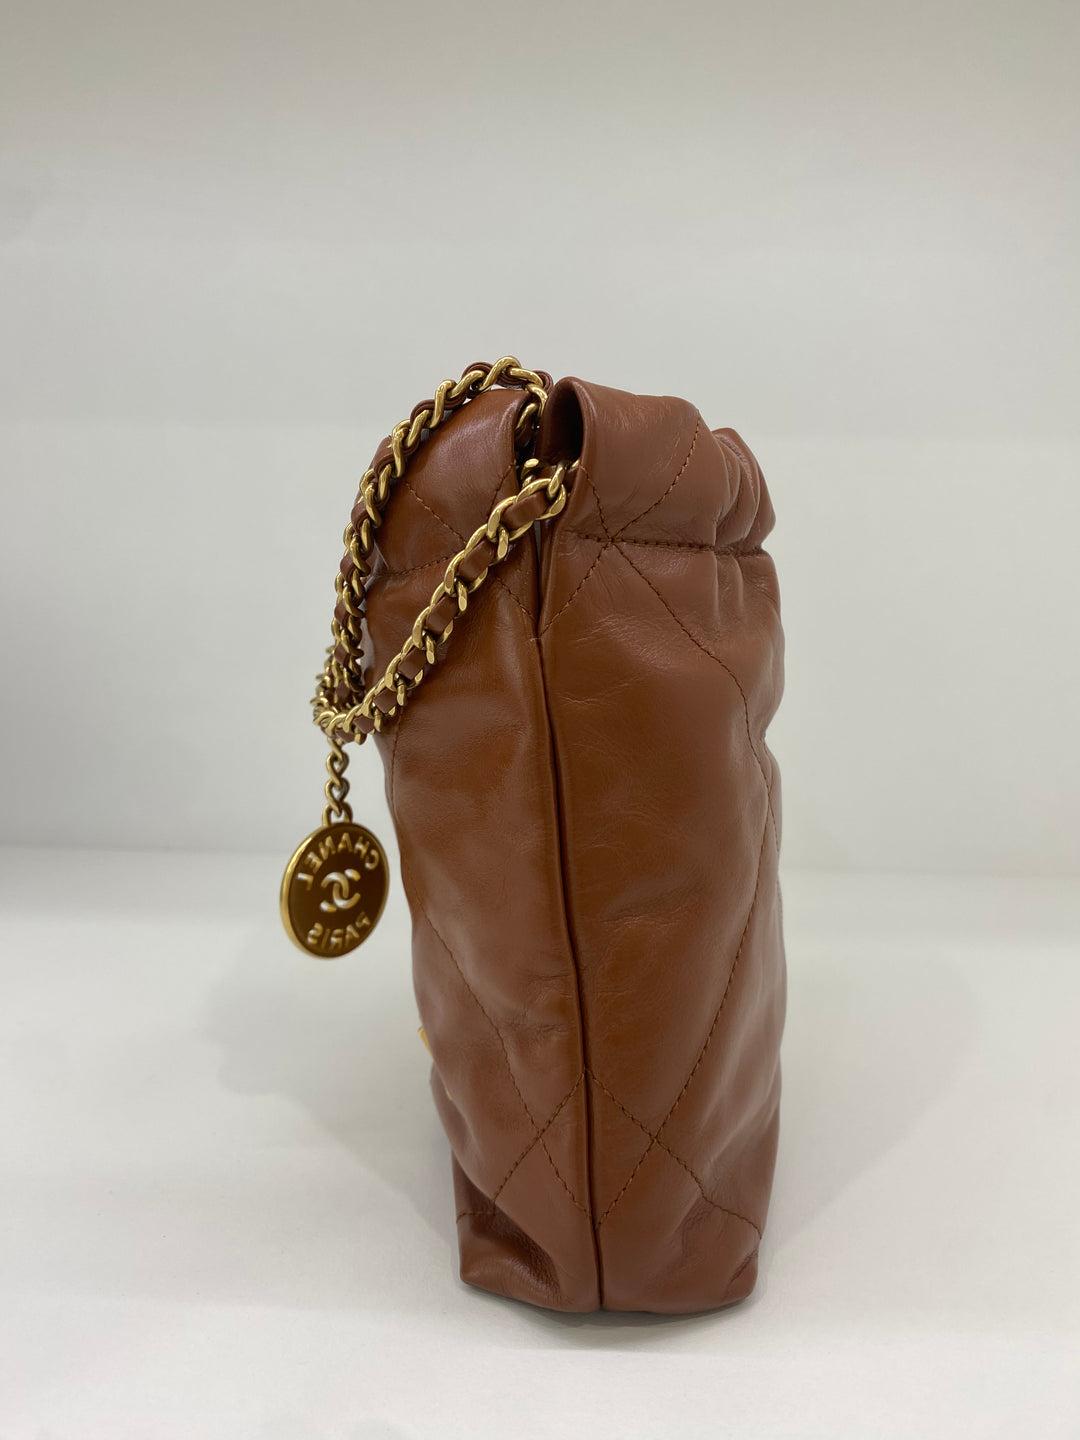 Chanel 22 Bag Mini - Caramel GHW In Excellent Condition For Sale In Double Bay, AU